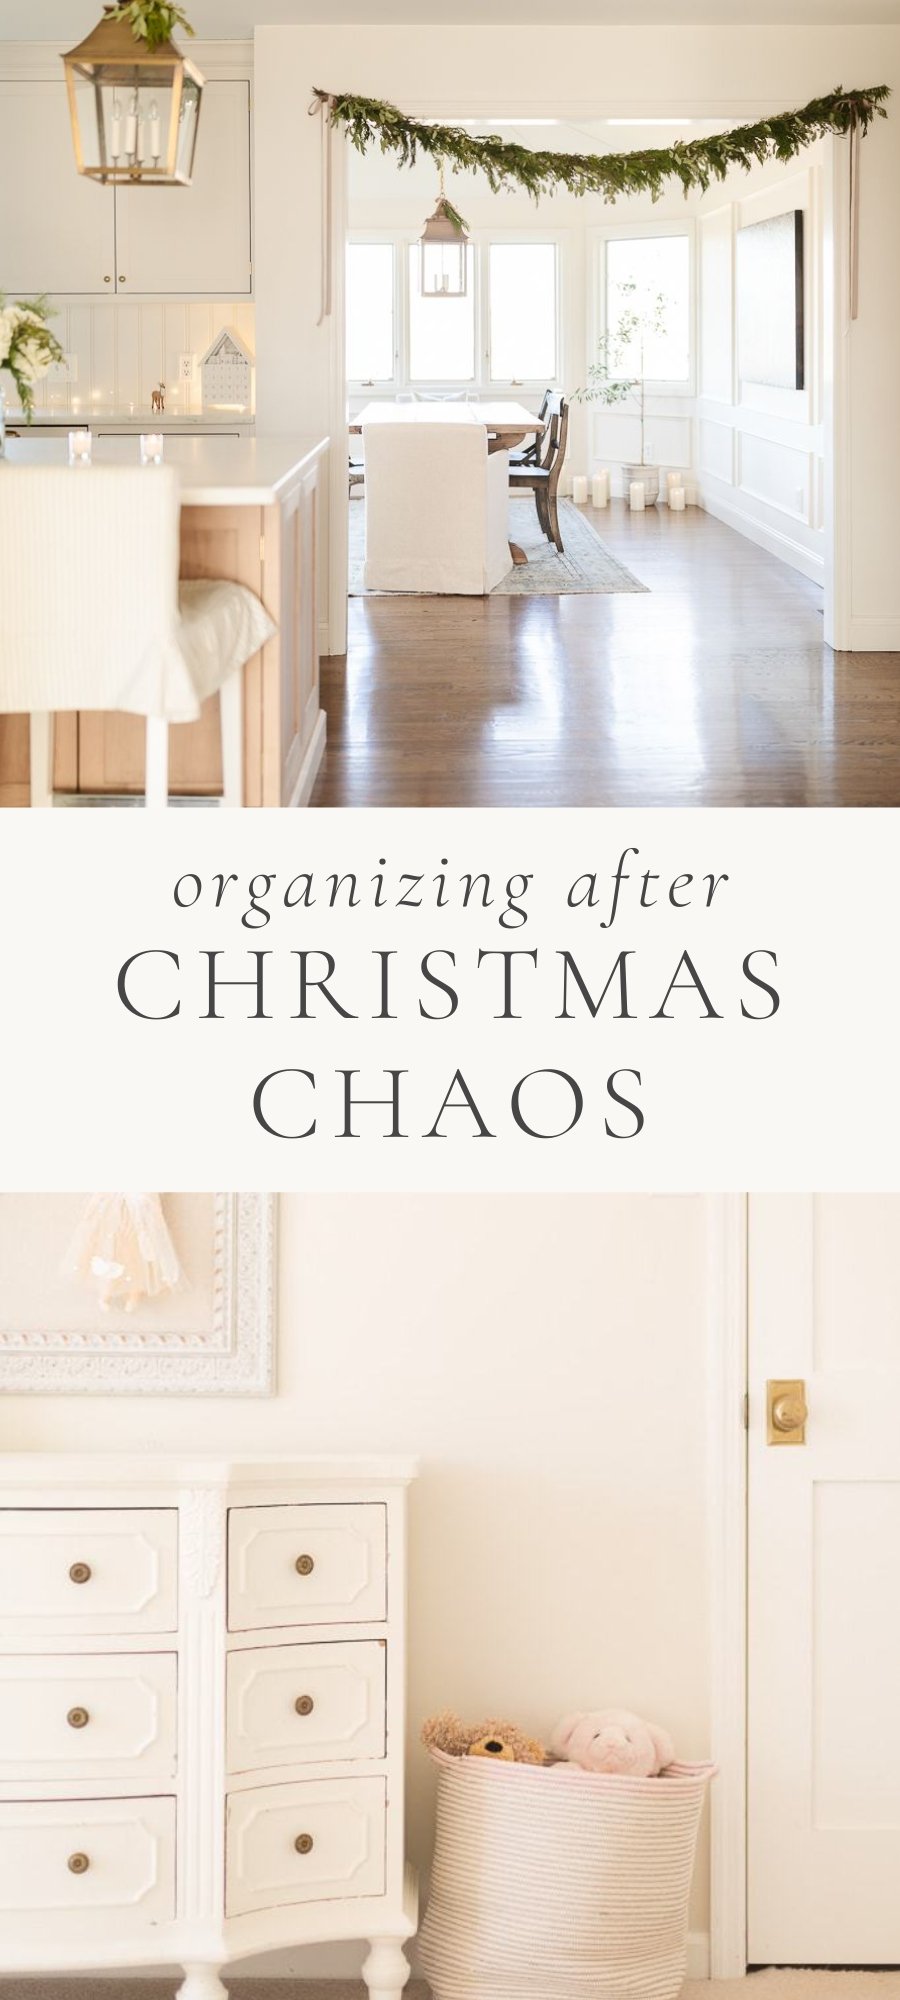 image of a kitchen and living decorated for the holidays with a garland at the top and image of a bedroom with pink dresser and basket at the bottom with caption in the middle saying "Organizing After Christmas Chaos"